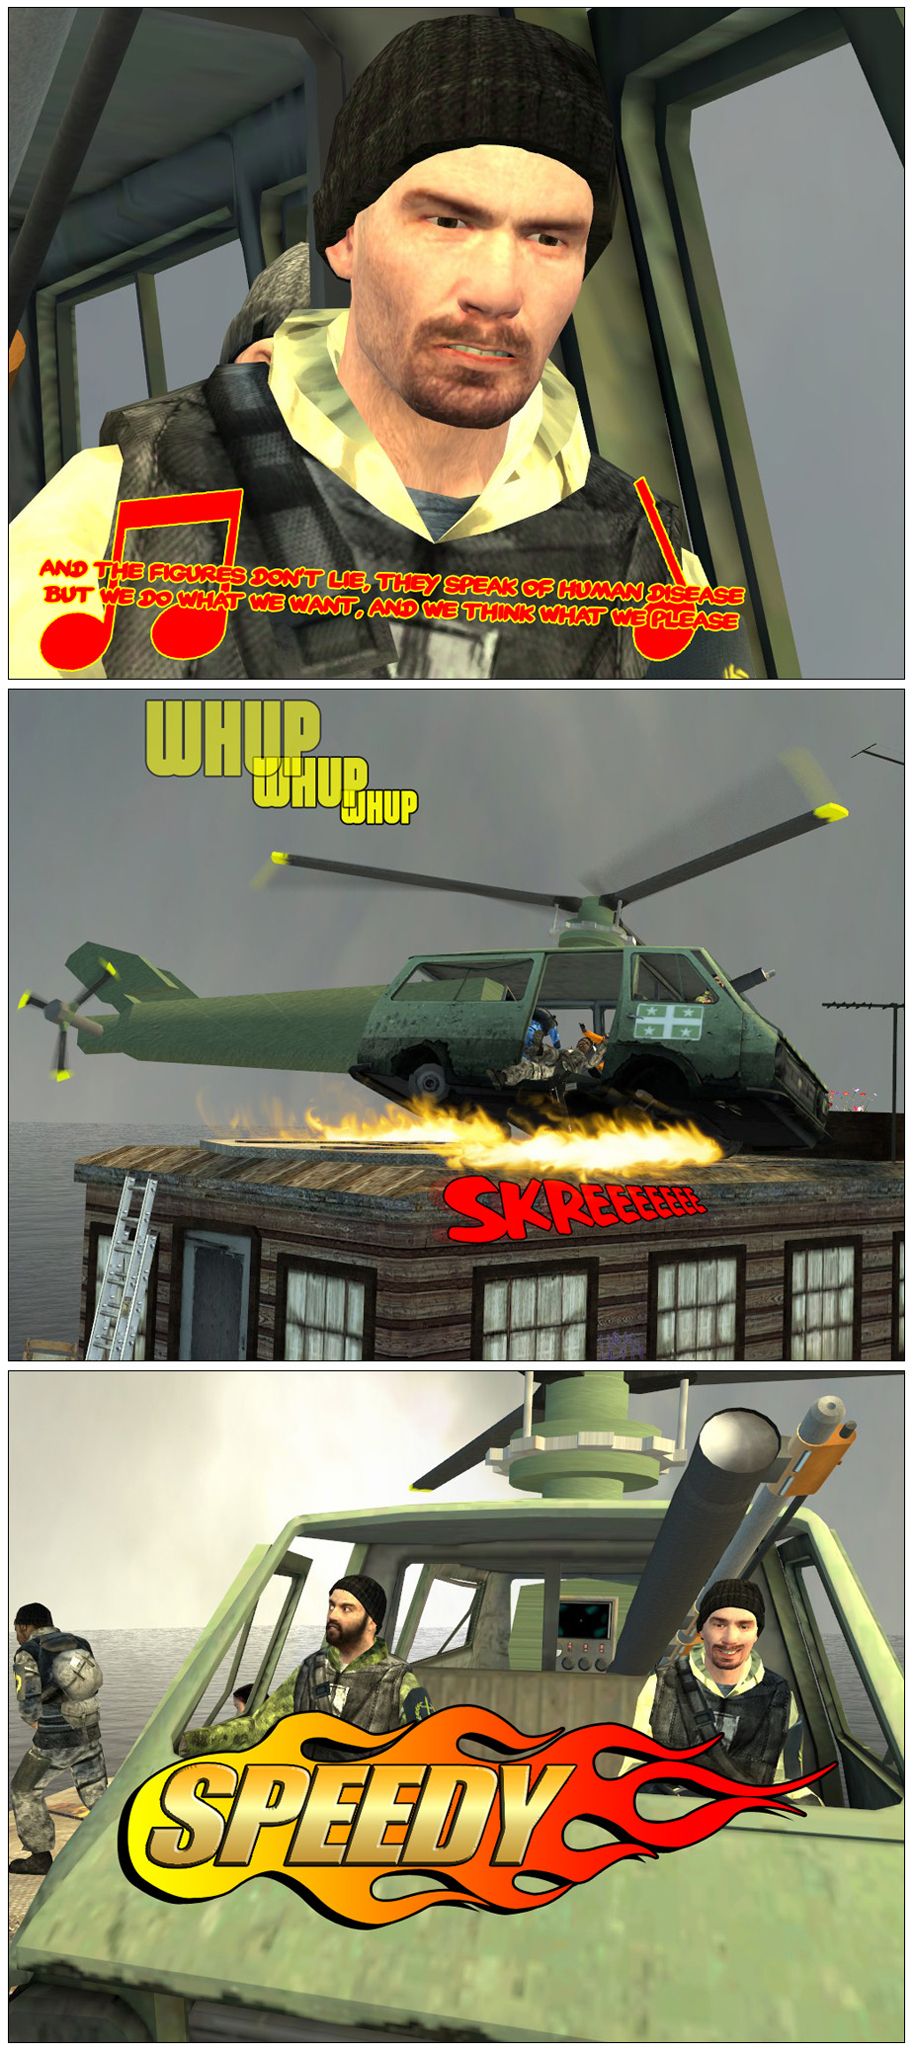 The lieutenant ignores Colonel Lightfoot's question as he continues to fly intently, as Bad Religion plays louder in the background. Suddenly, the van-copter lands hard on top of the houseboat, making everyone inside fall over. As the crew leaves the van in a hurry looking sick, the lieutenant smiles to himself as a Crazy Taxi-like message saying Speedy appears.